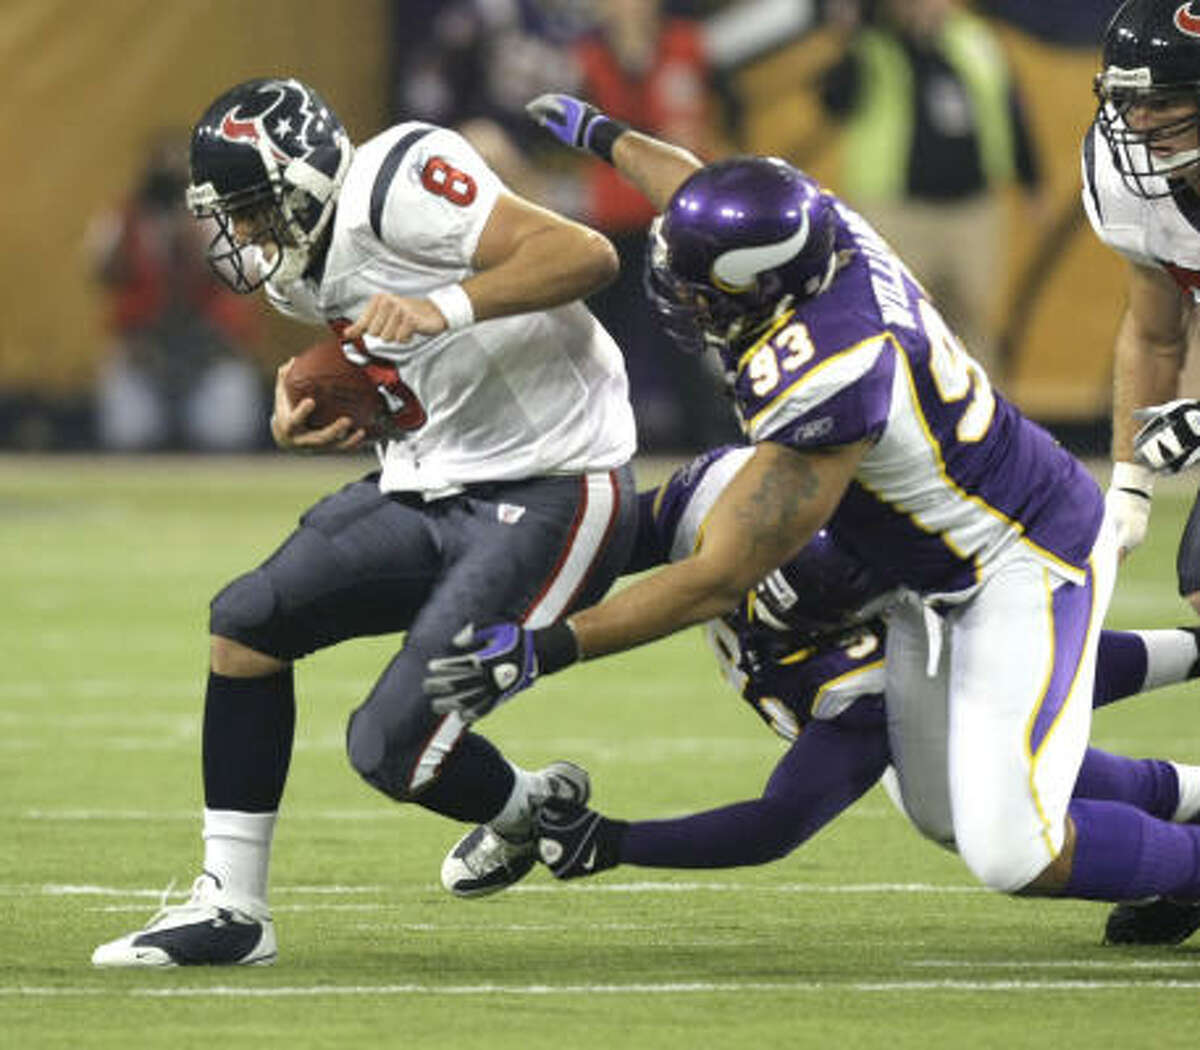 Texans quarterback Matt Schaub (8) is sacked by Vikings defensive end Ray Edwards (91) and defensive tackle Kevin Williams (93) during the first quarter.